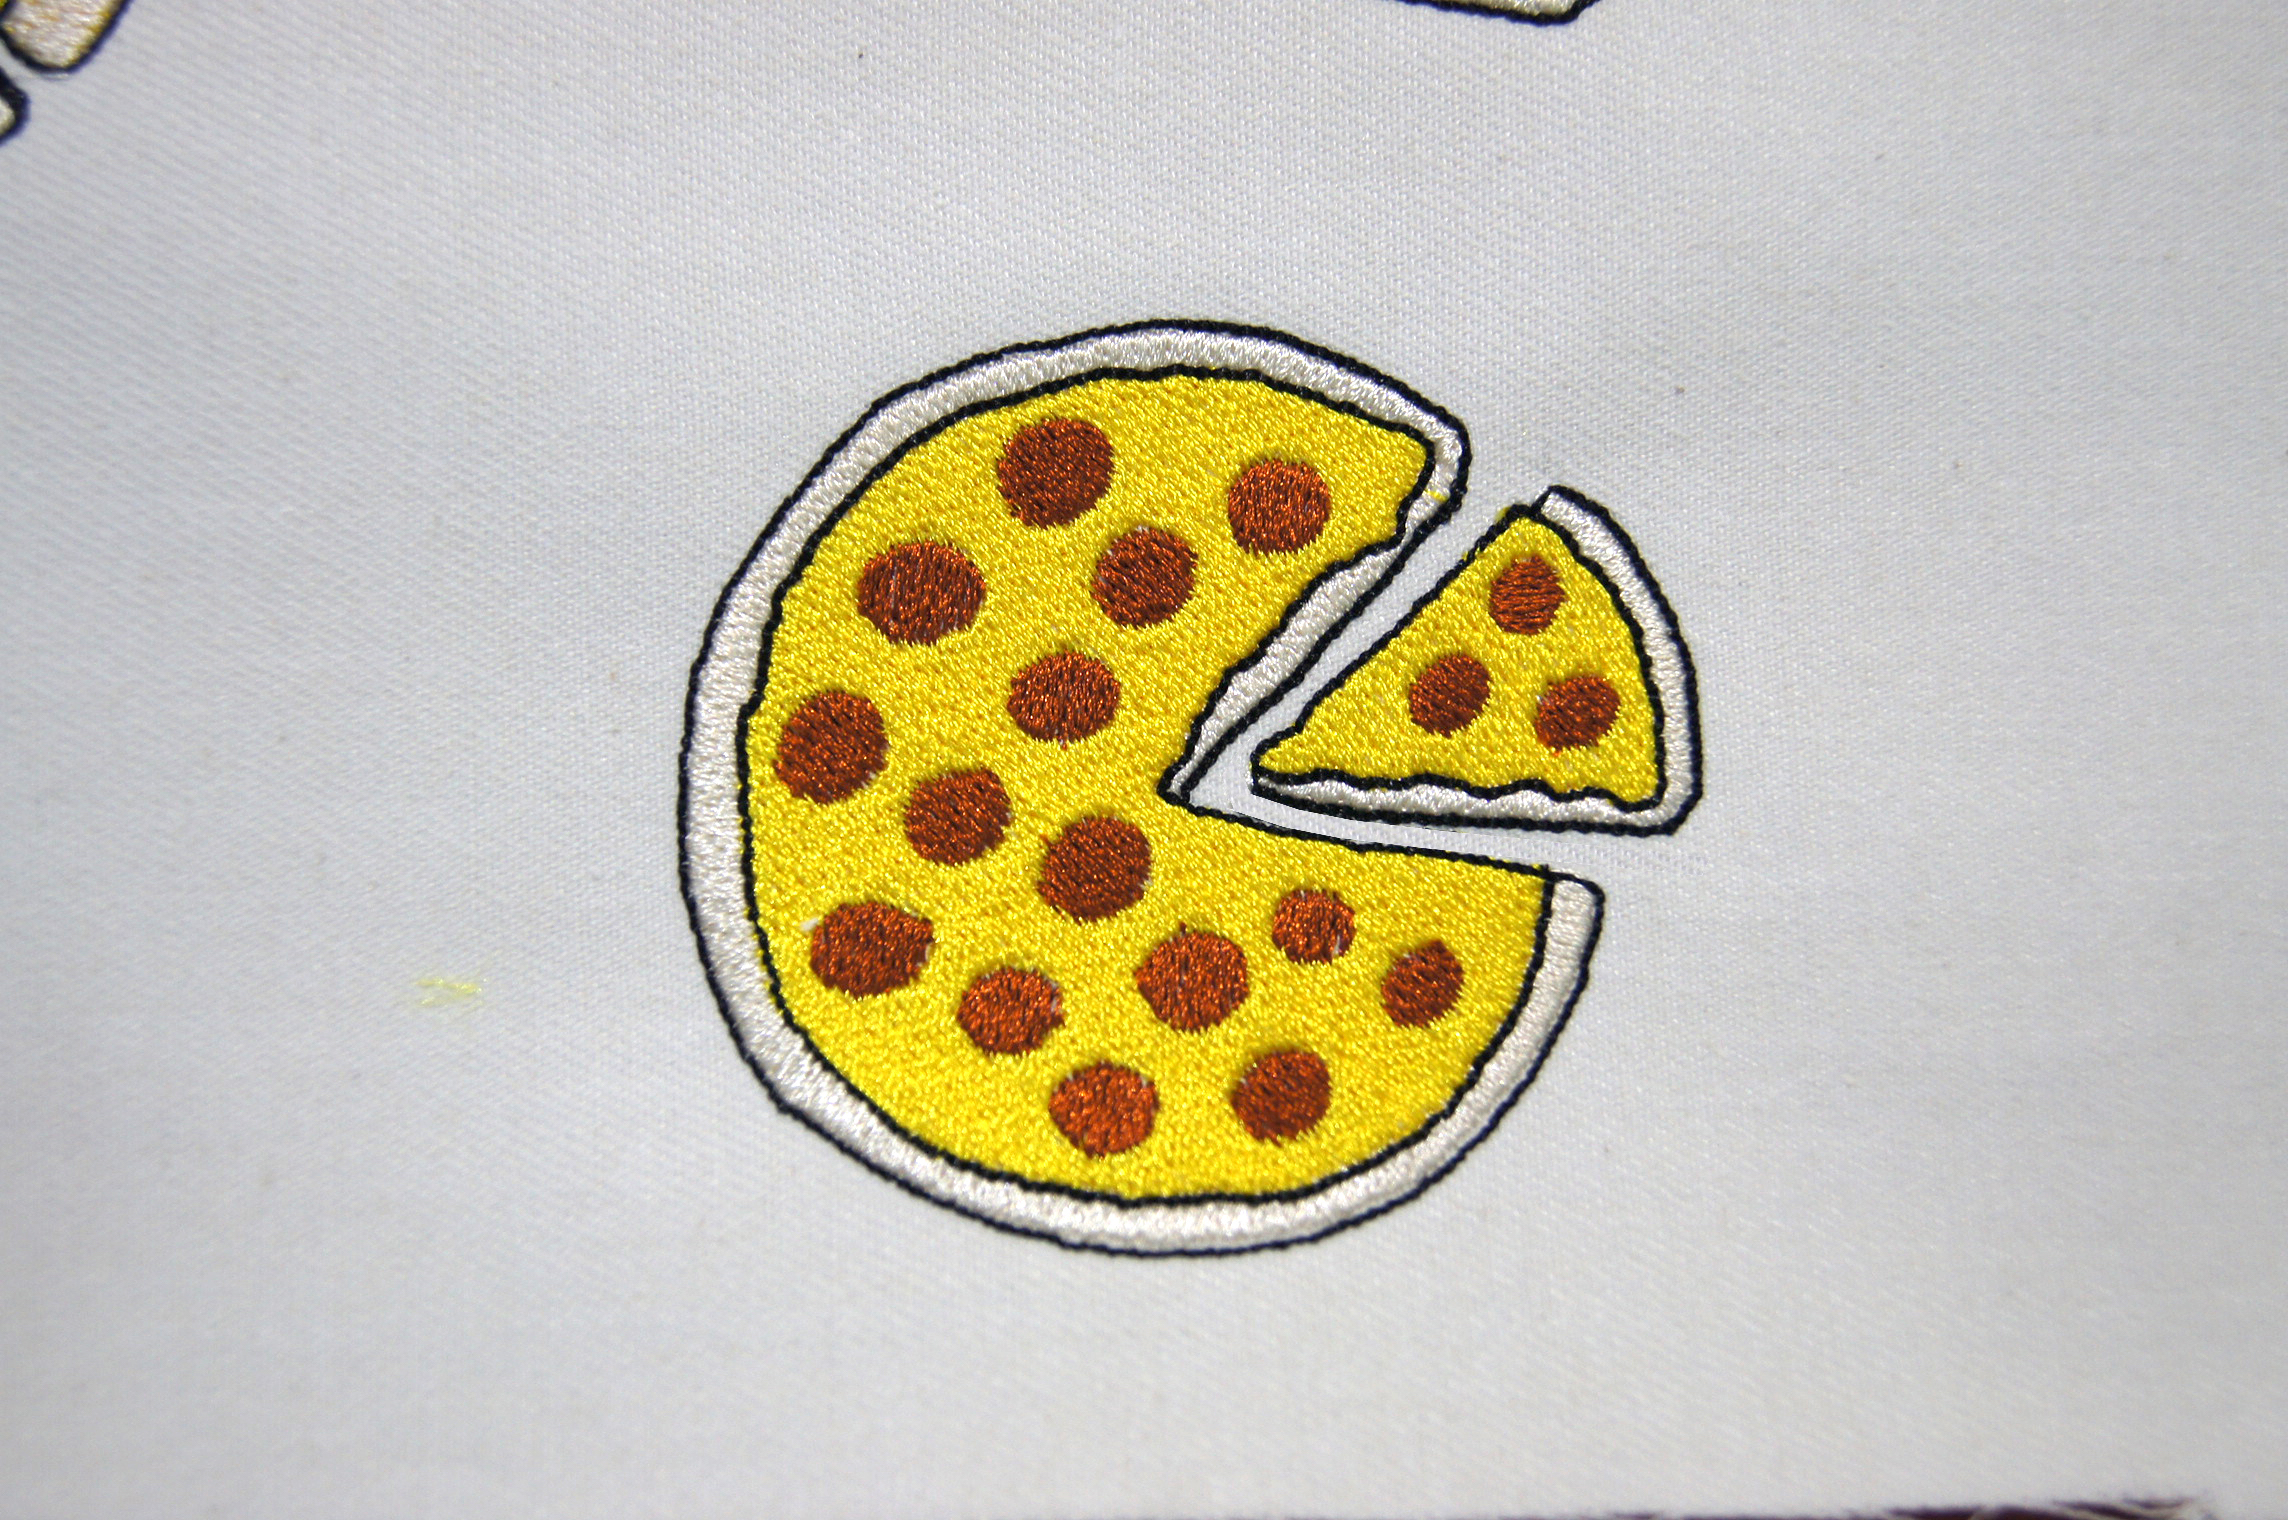 Convert Picture To Embroidery Pattern Pepperoni Pizza Embroidery Design 27x25 Resizable And Convert Able